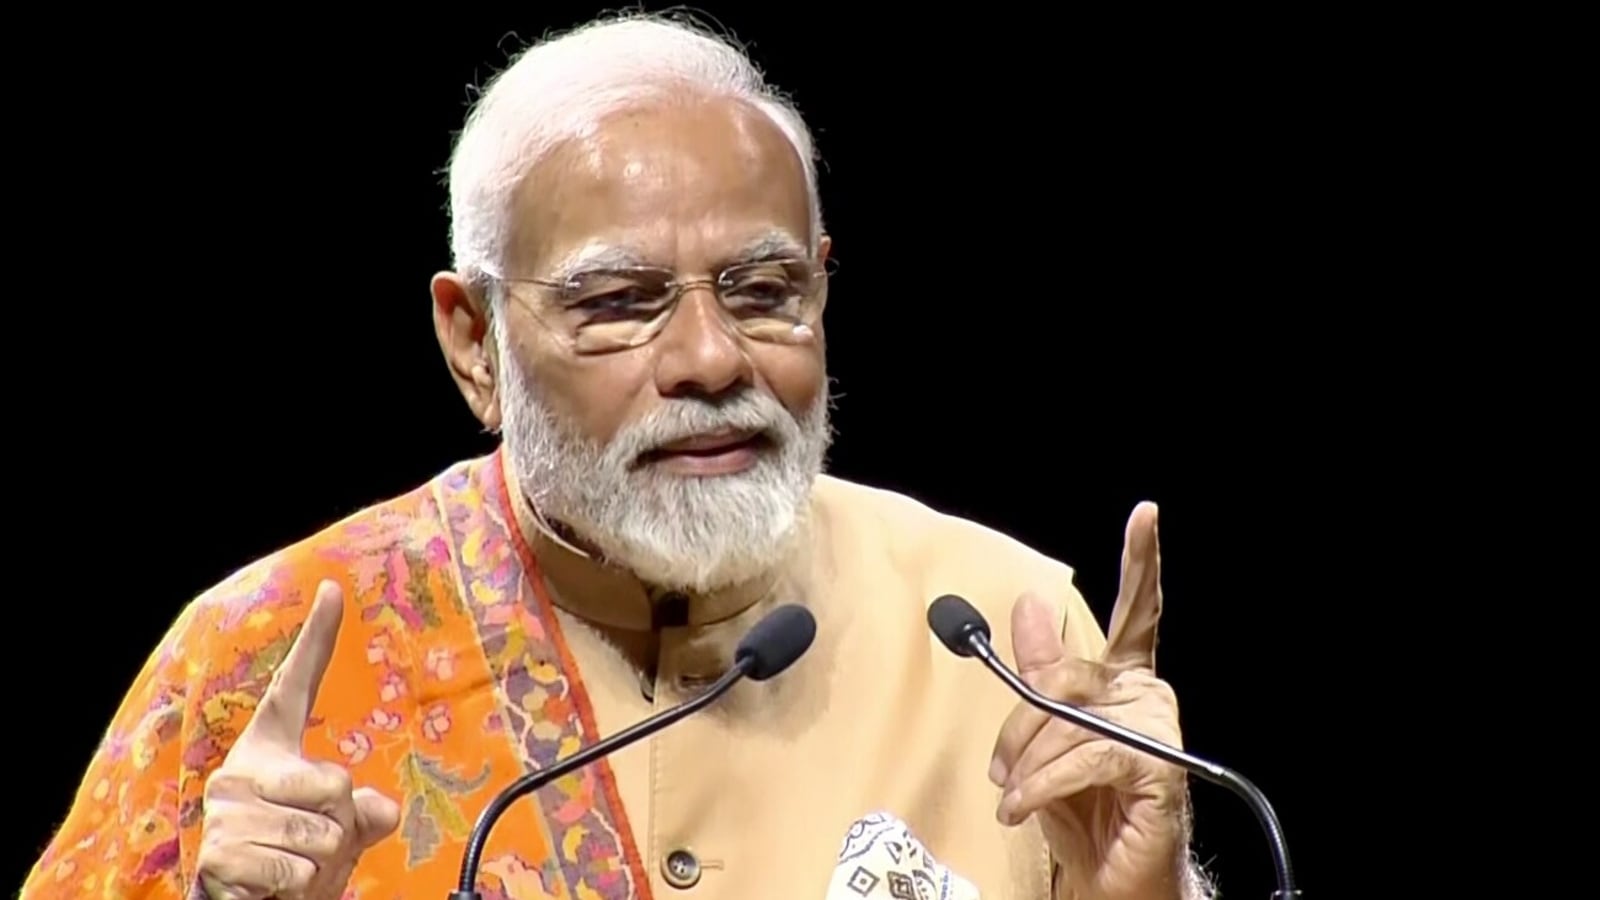 Not here to talk about Modi govt, but hail Indians: PM tells diaspora in Germany